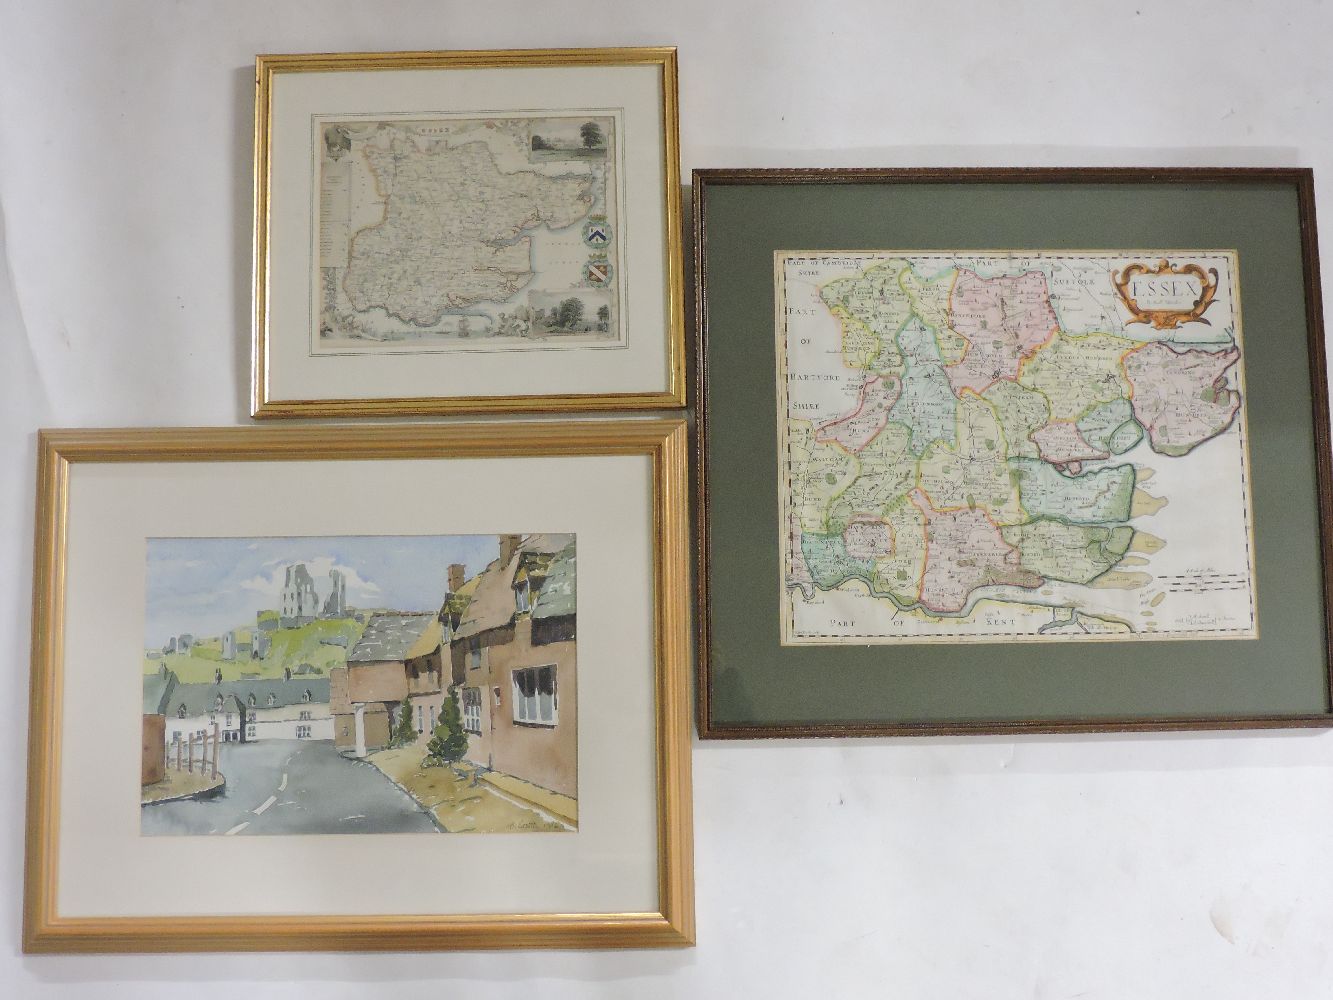 A Map of Essex, by Robert Morden, 35 x 42cm, another, and a watercolour